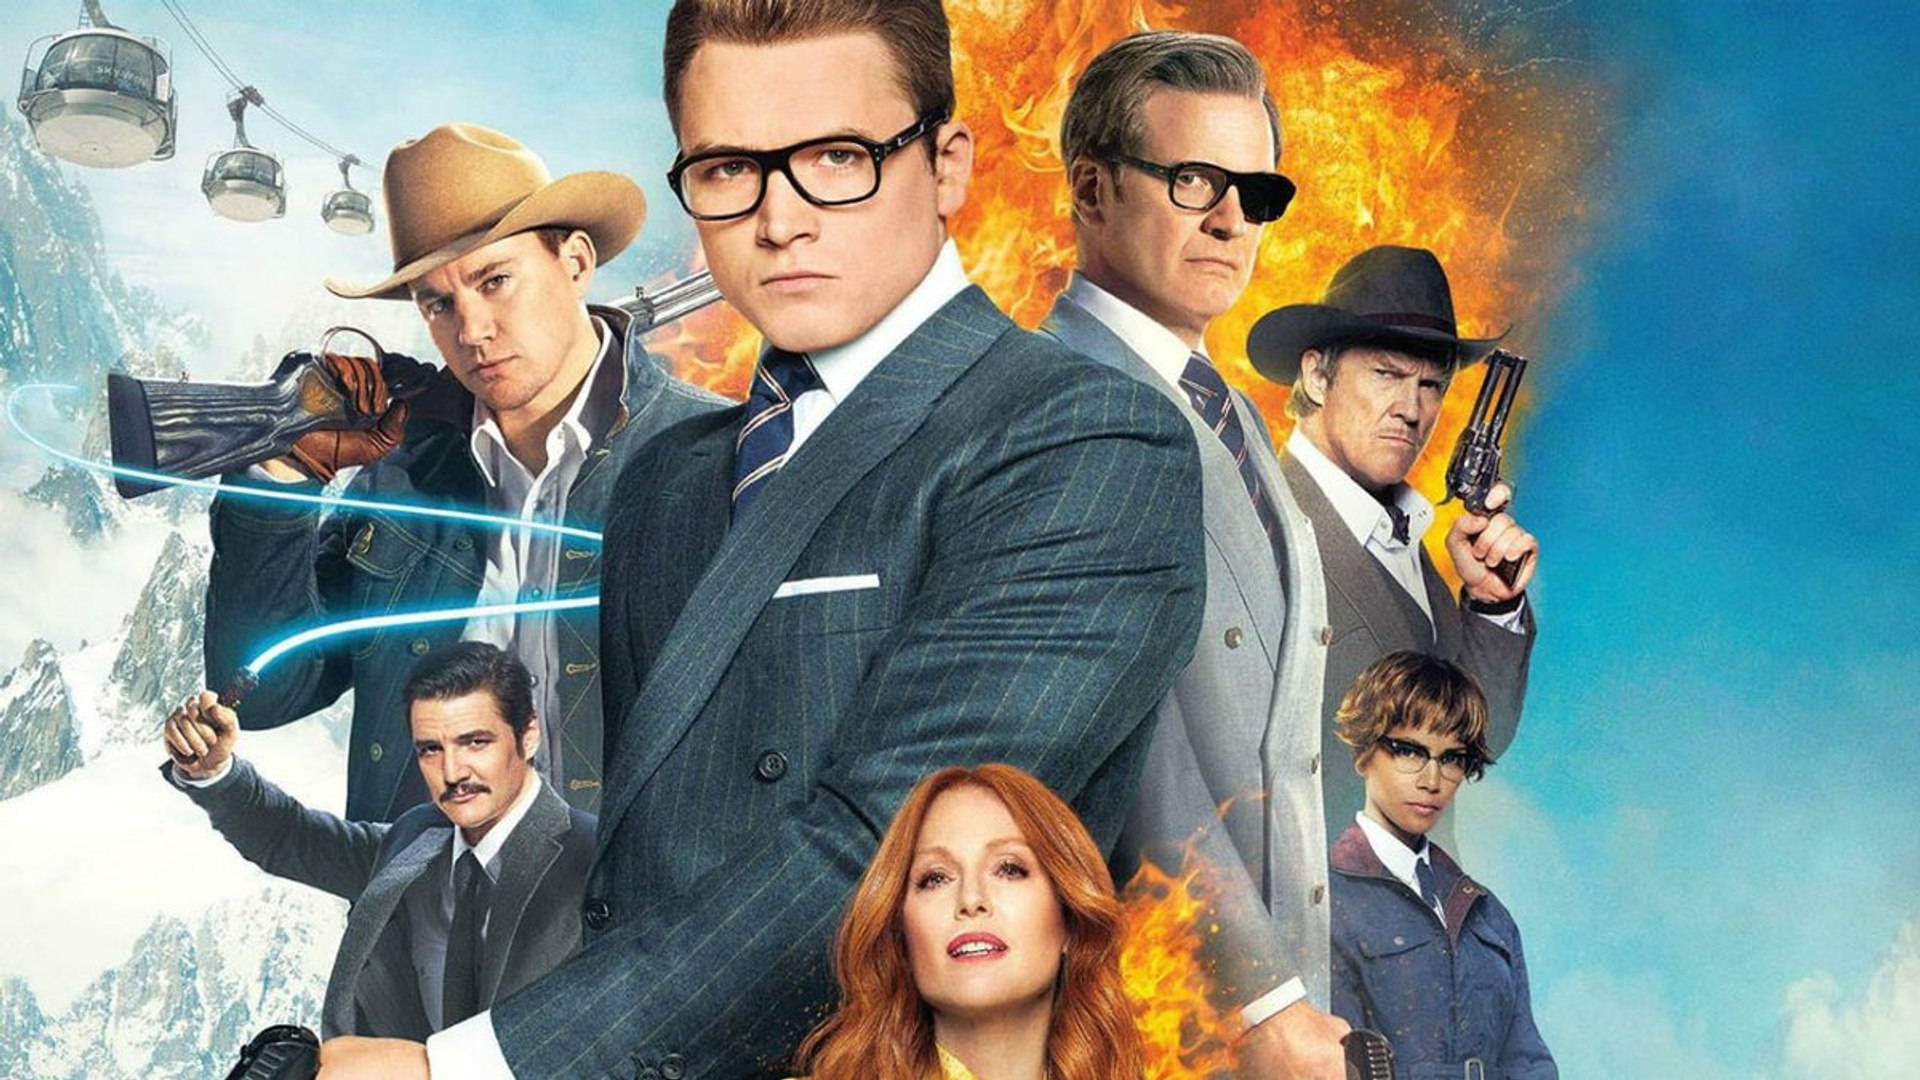 Kingsman: The Golden Circle Full "HD" Movie - video Dailymotion